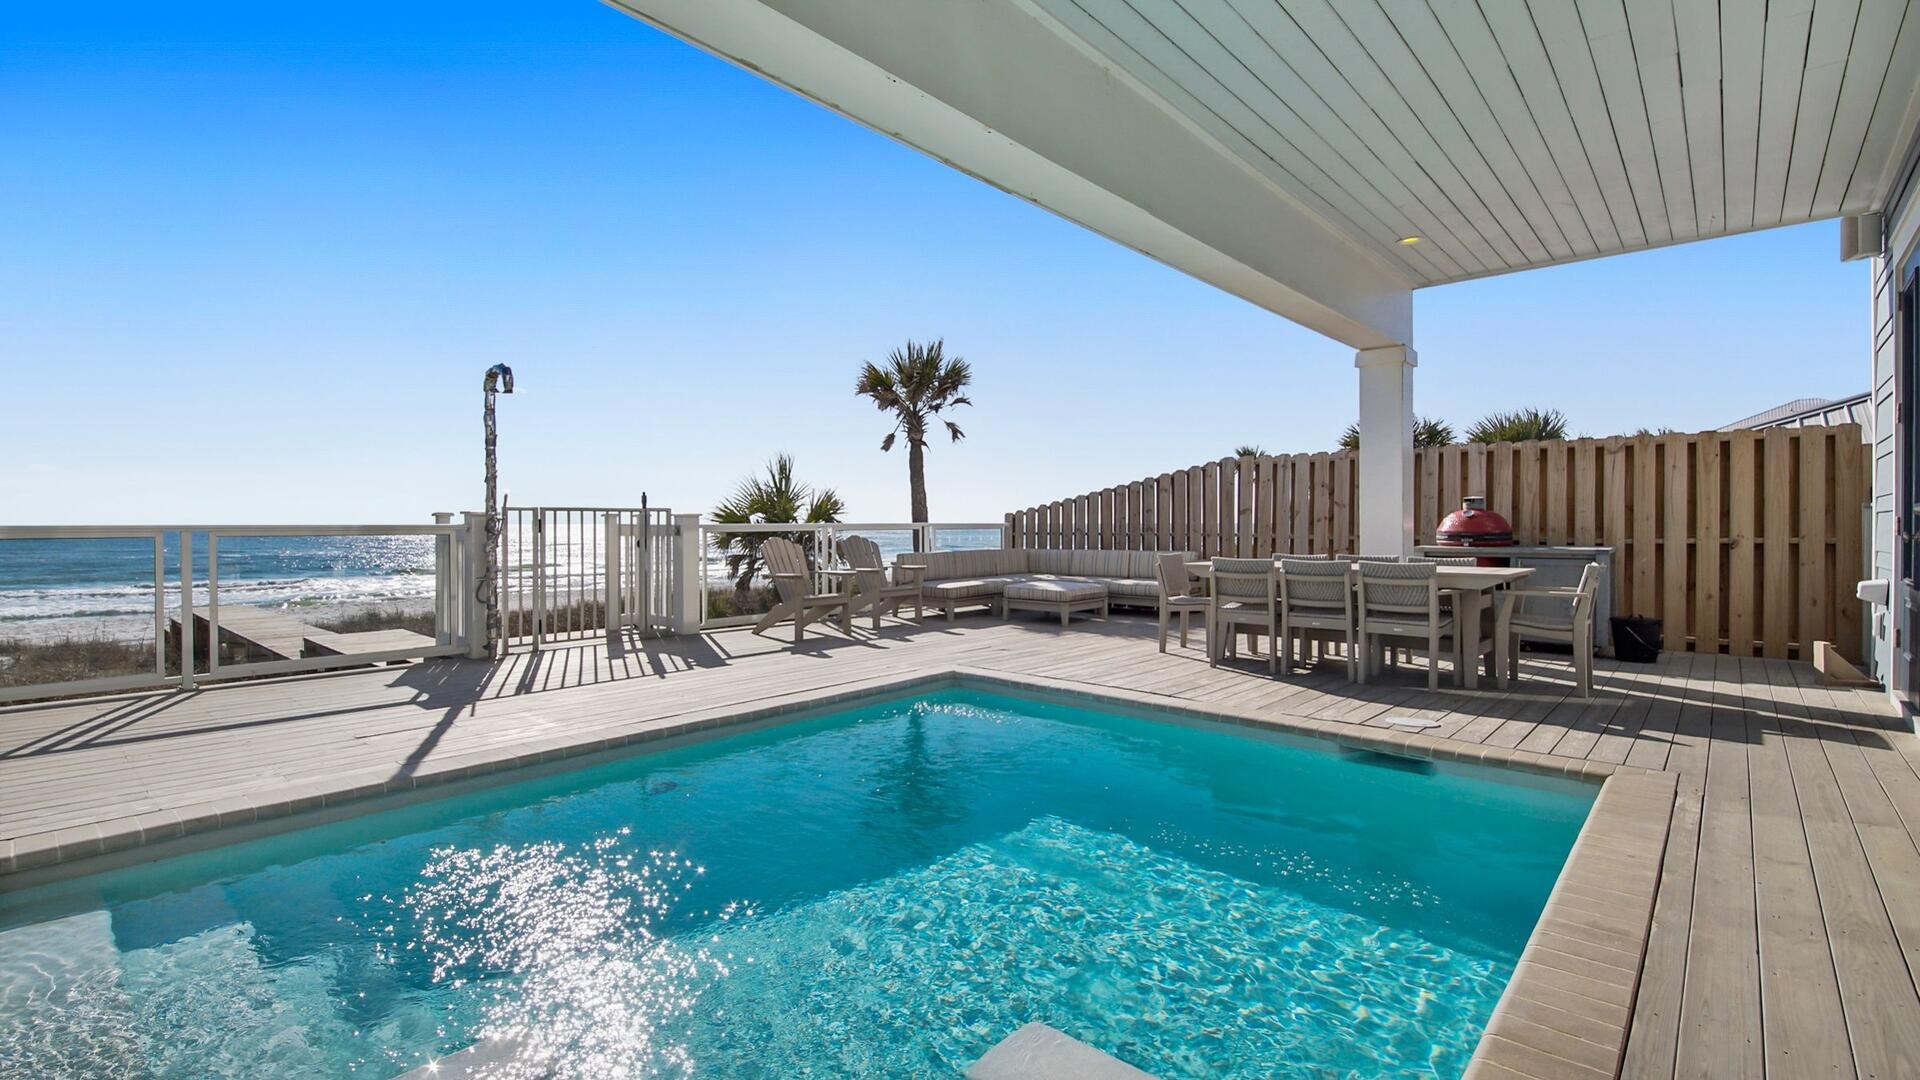 Spacious Pool Deck with Plenty of Lounge Chairs for Everyone